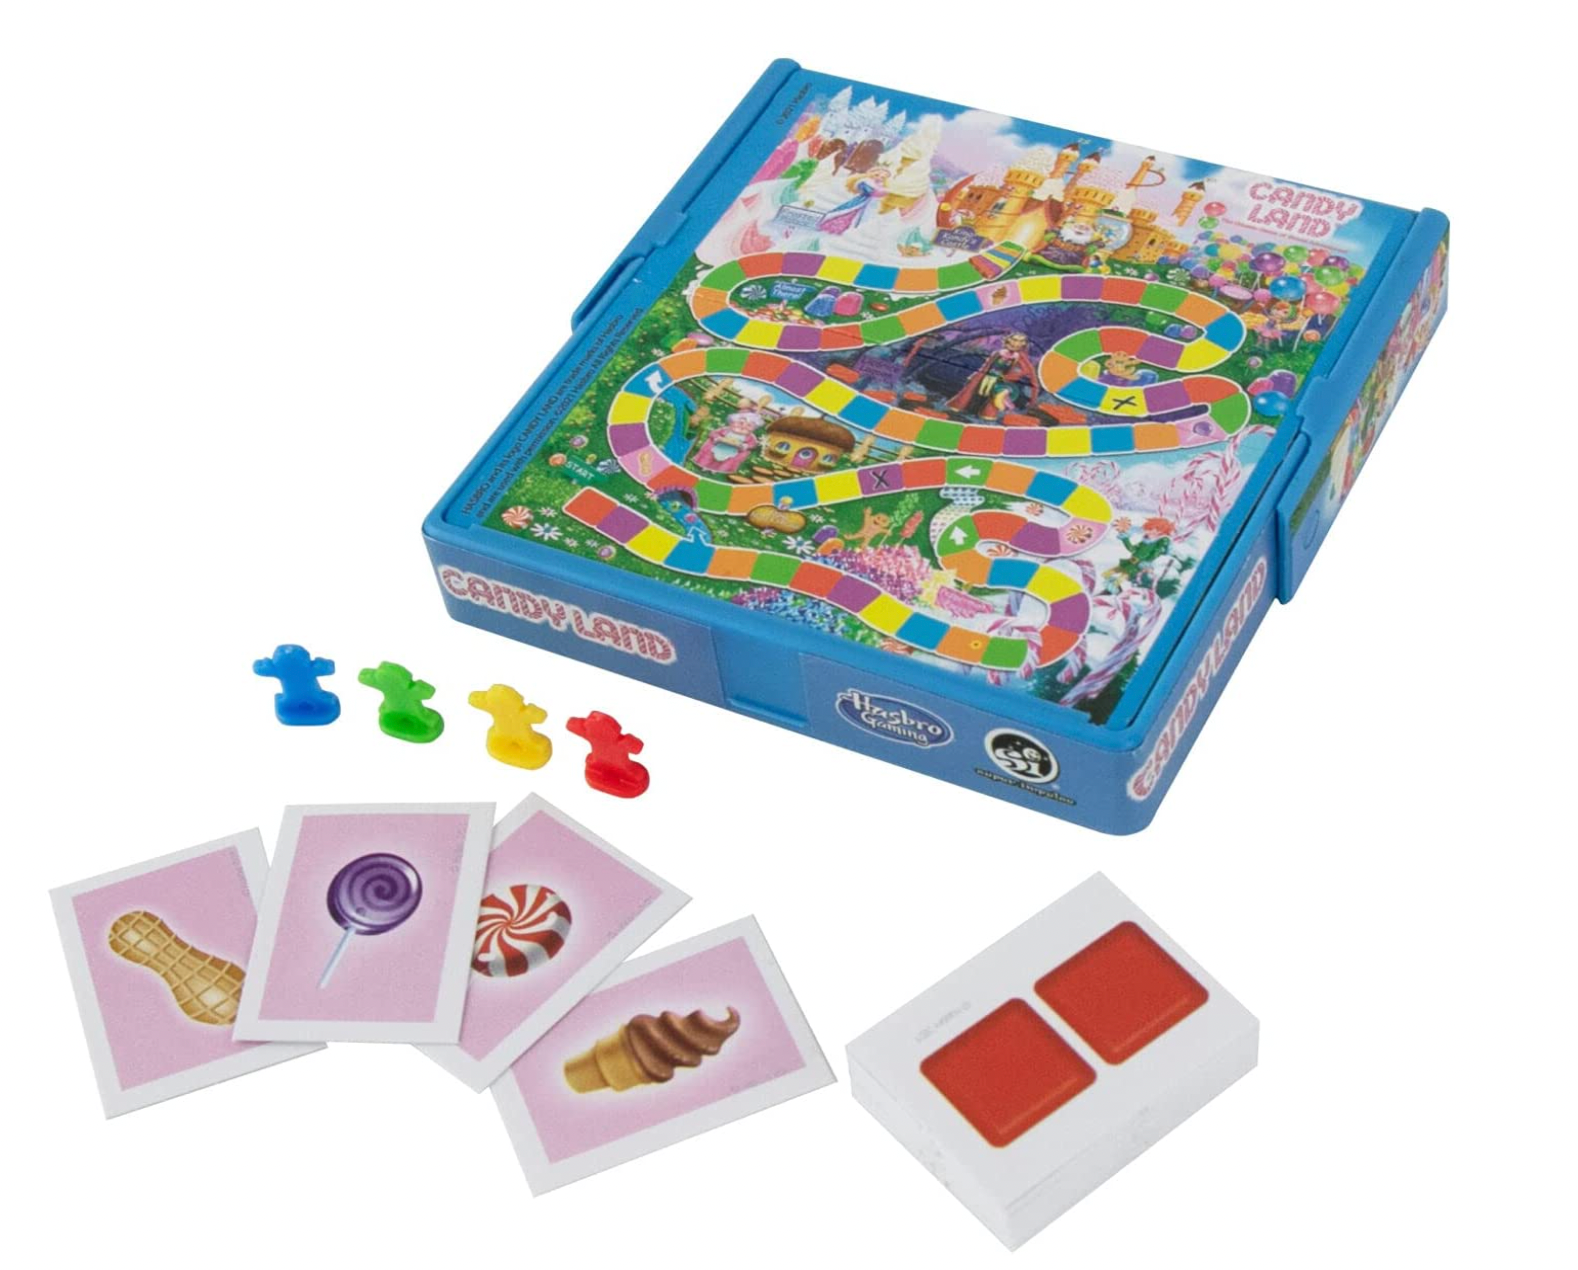 World's Smallest Candy Land Board Game